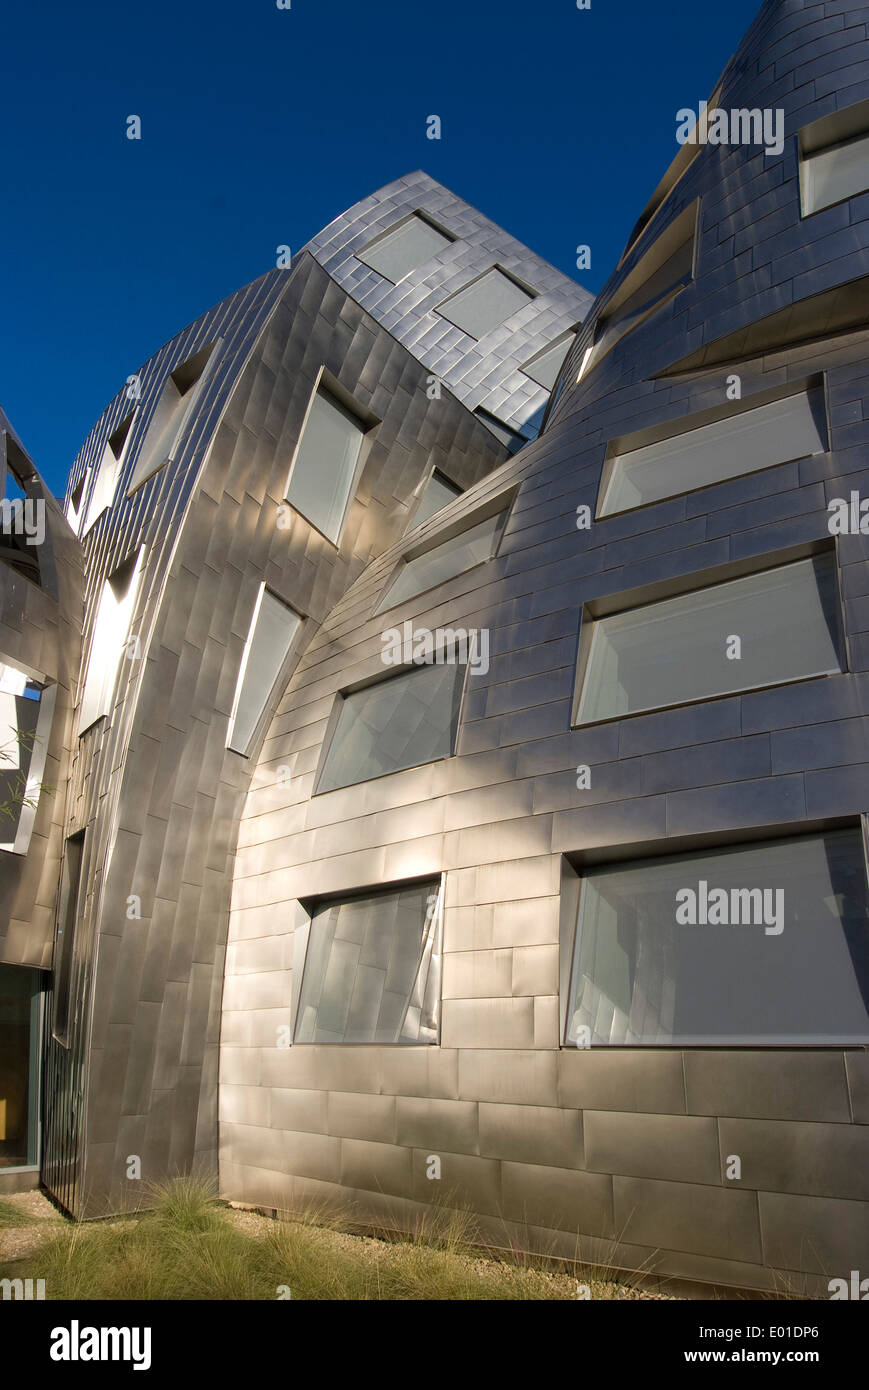 The Cleveland Clinic, Lou Ruvo Center for Brain Health, Frank Gehry architect, Las Vegas, Nevada, United States Stock Photo